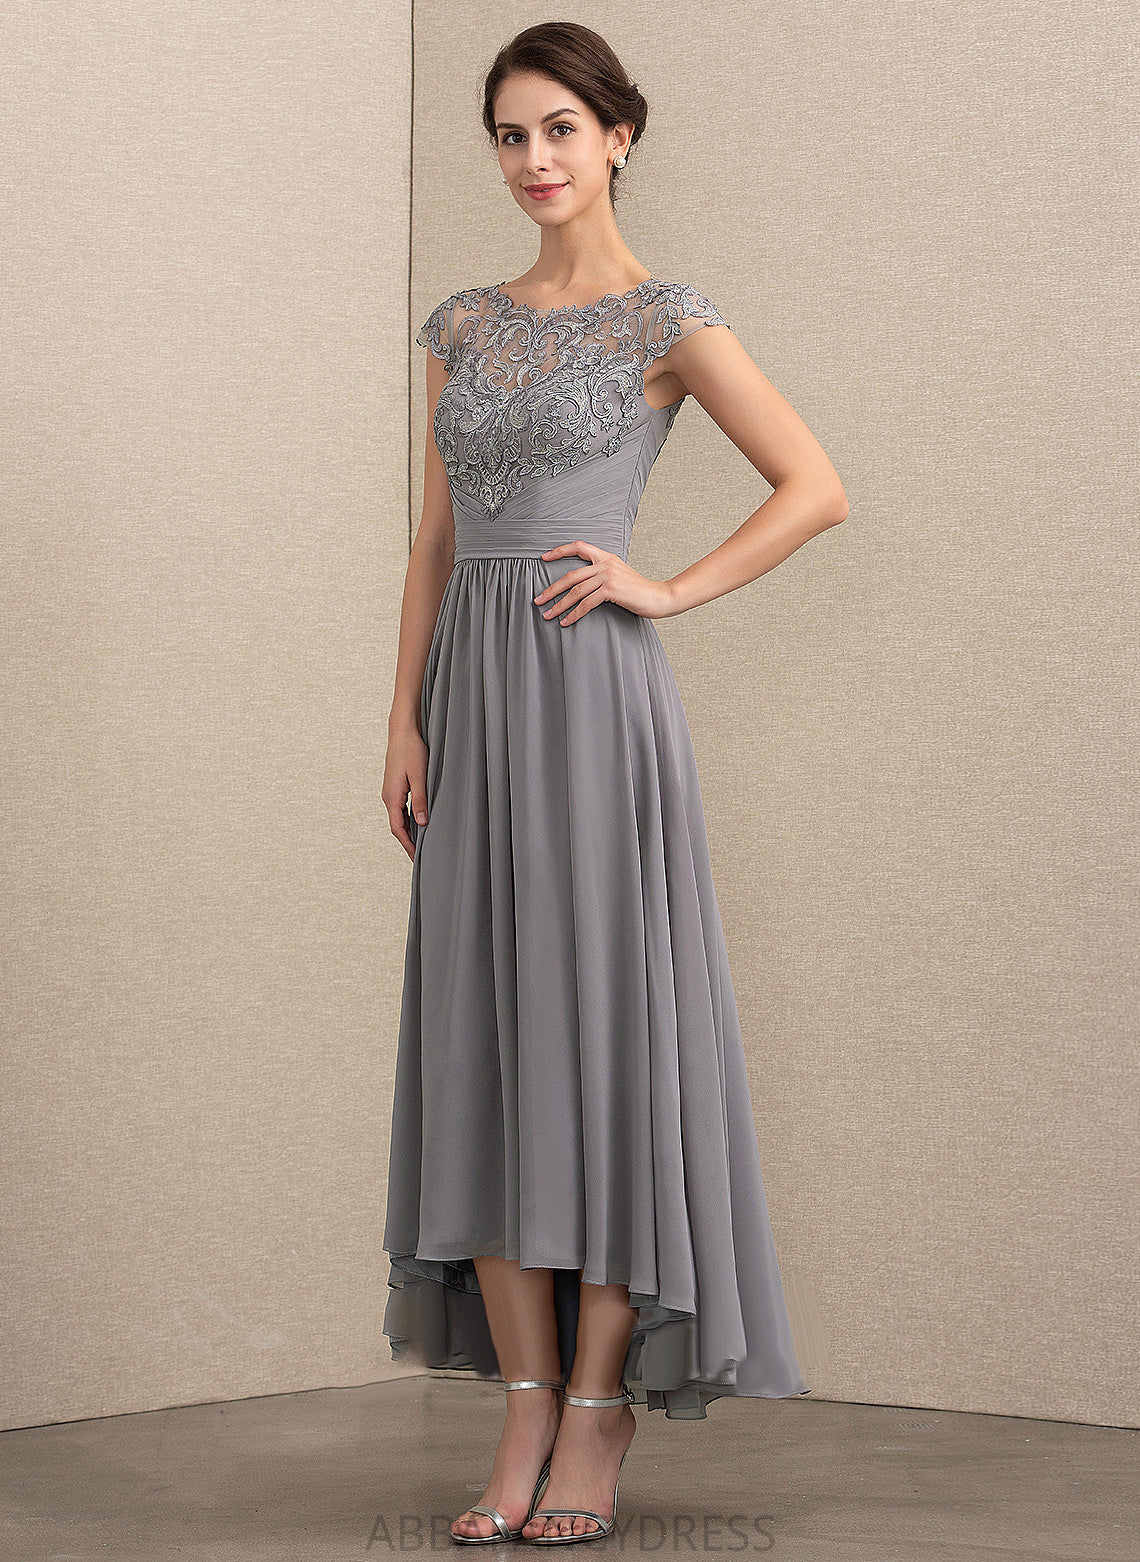 Lace Neck Dress Chiffon Mother of the Bride Dresses Scoop the Charlize A-Line of Mother Asymmetrical Bride